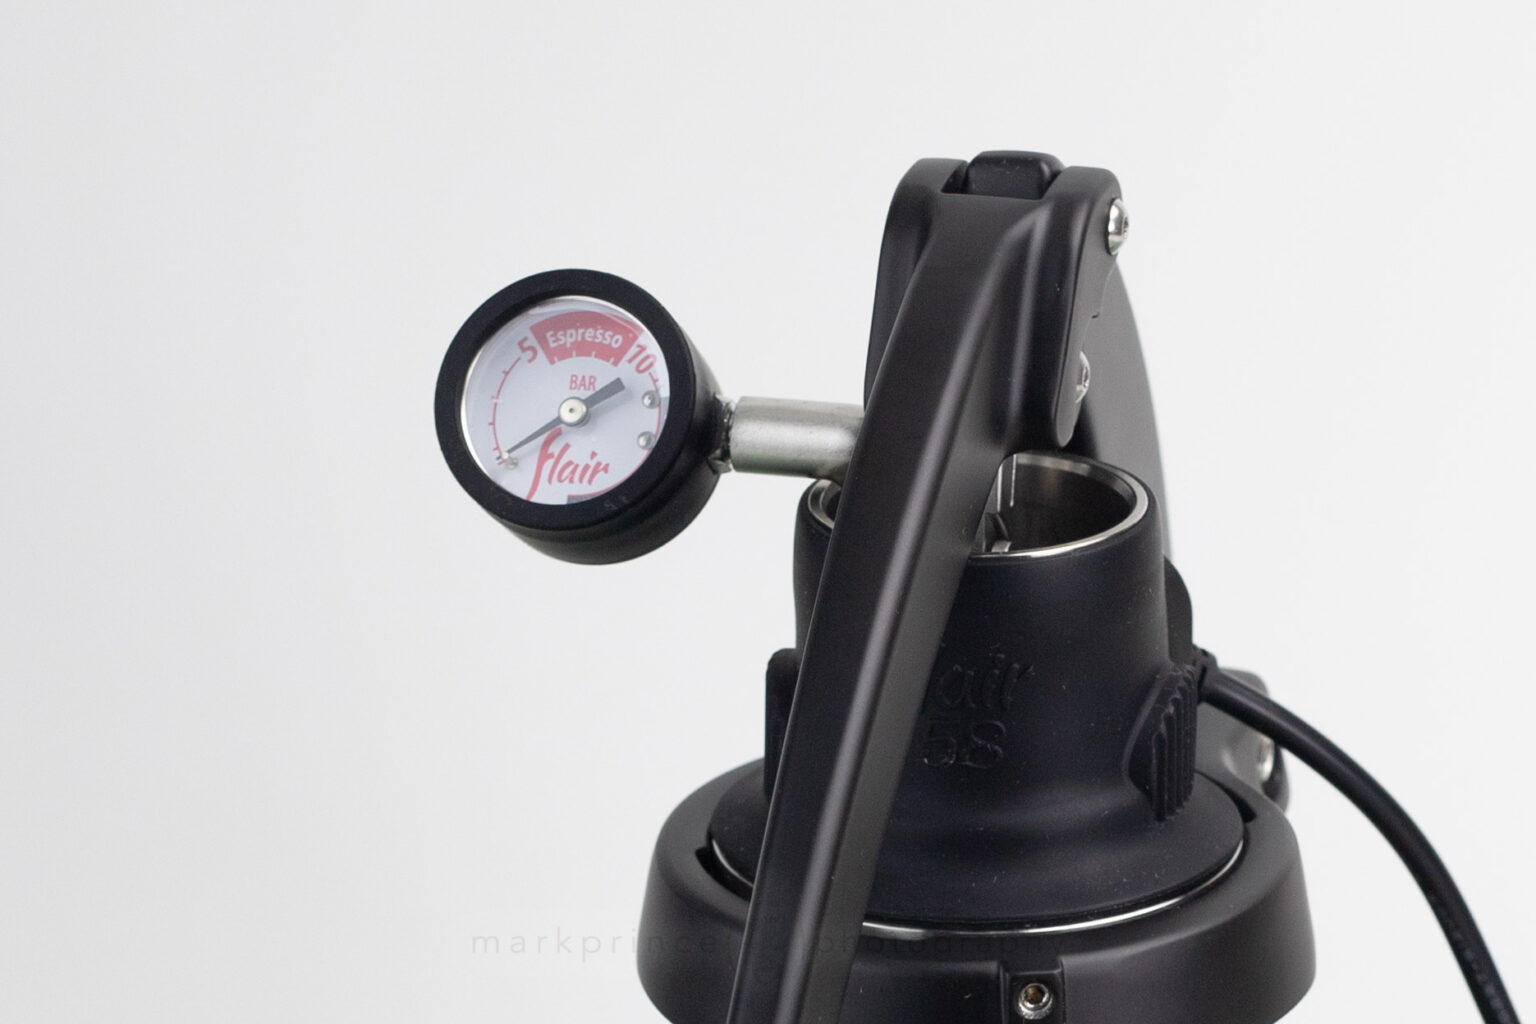 With the new plunger valve design, you never have to remove the pressure gauge piston from the machine - just depress the lever, and fill the chamber.